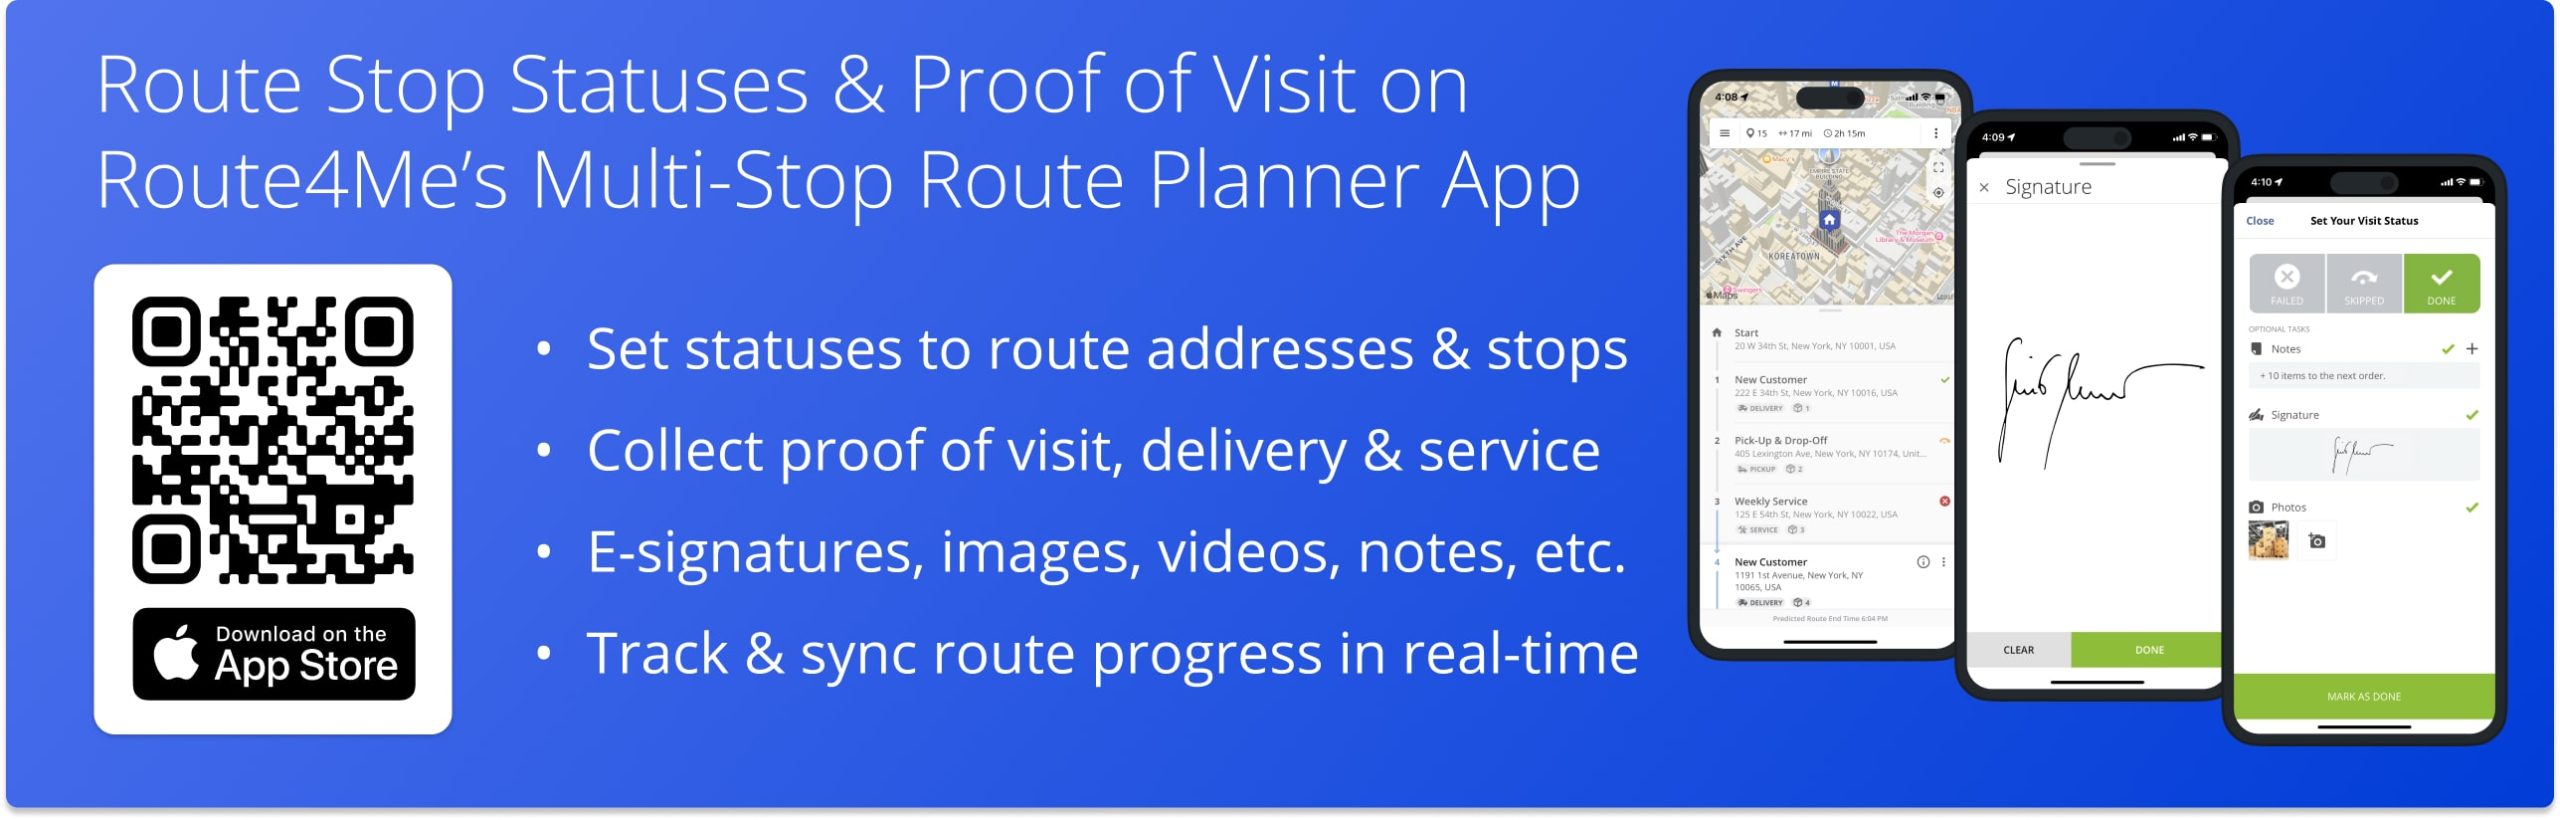 Setting statuses to route stops and attaching electronic proof of visit, delivery, and service on Route4Me's iPhone Route Planner app.